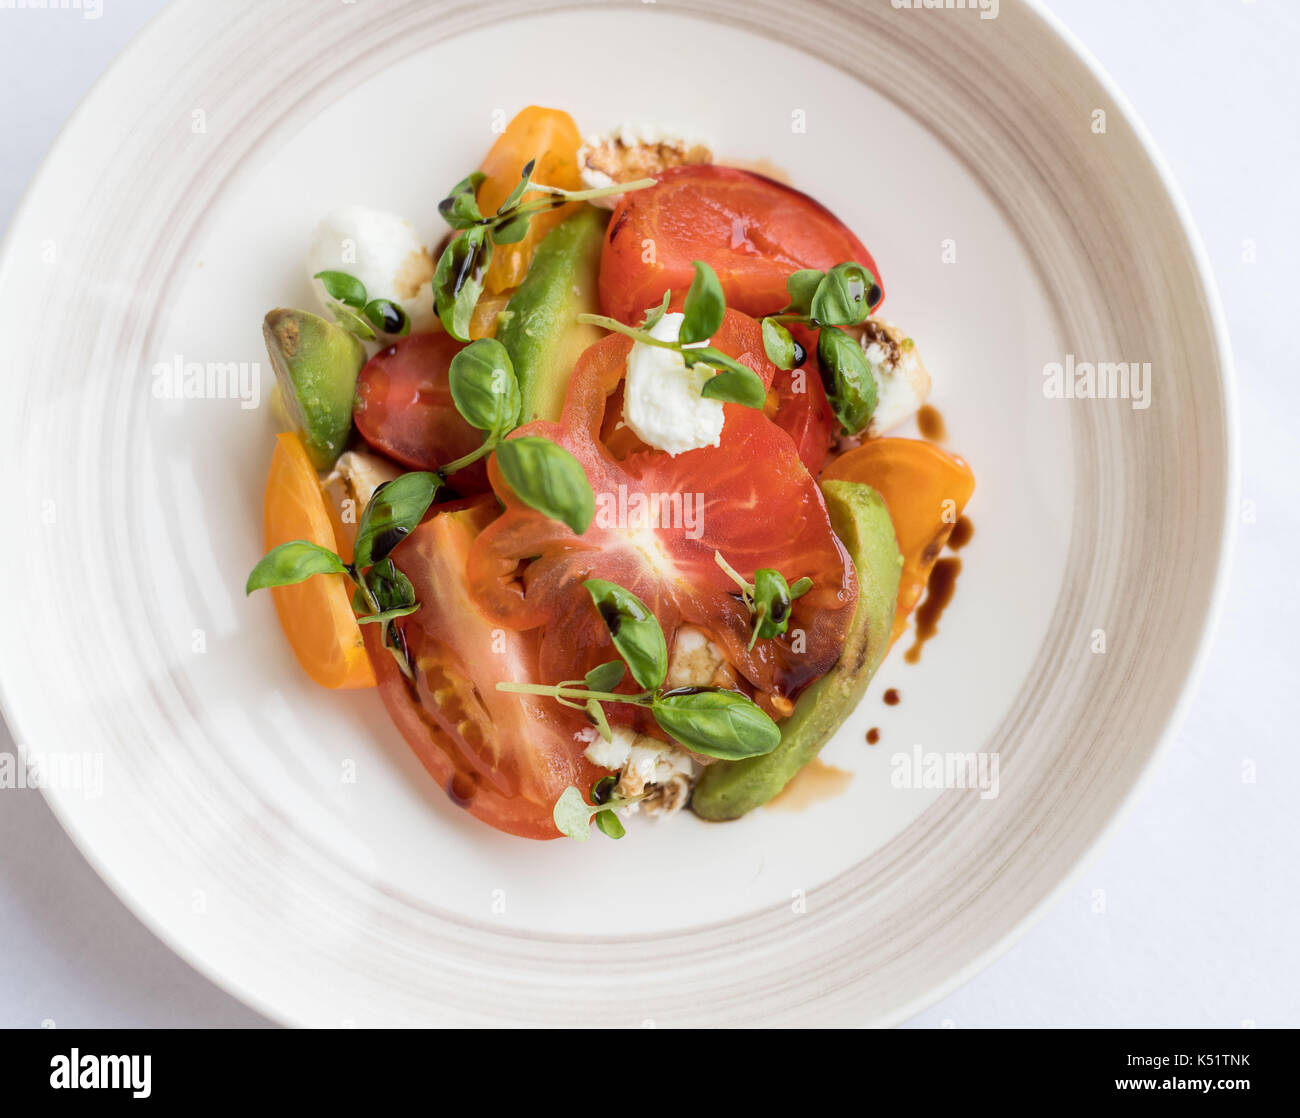 A tomato sald with basil and balsalmic vinegar on a white plate and white tablecloth Stock Photo